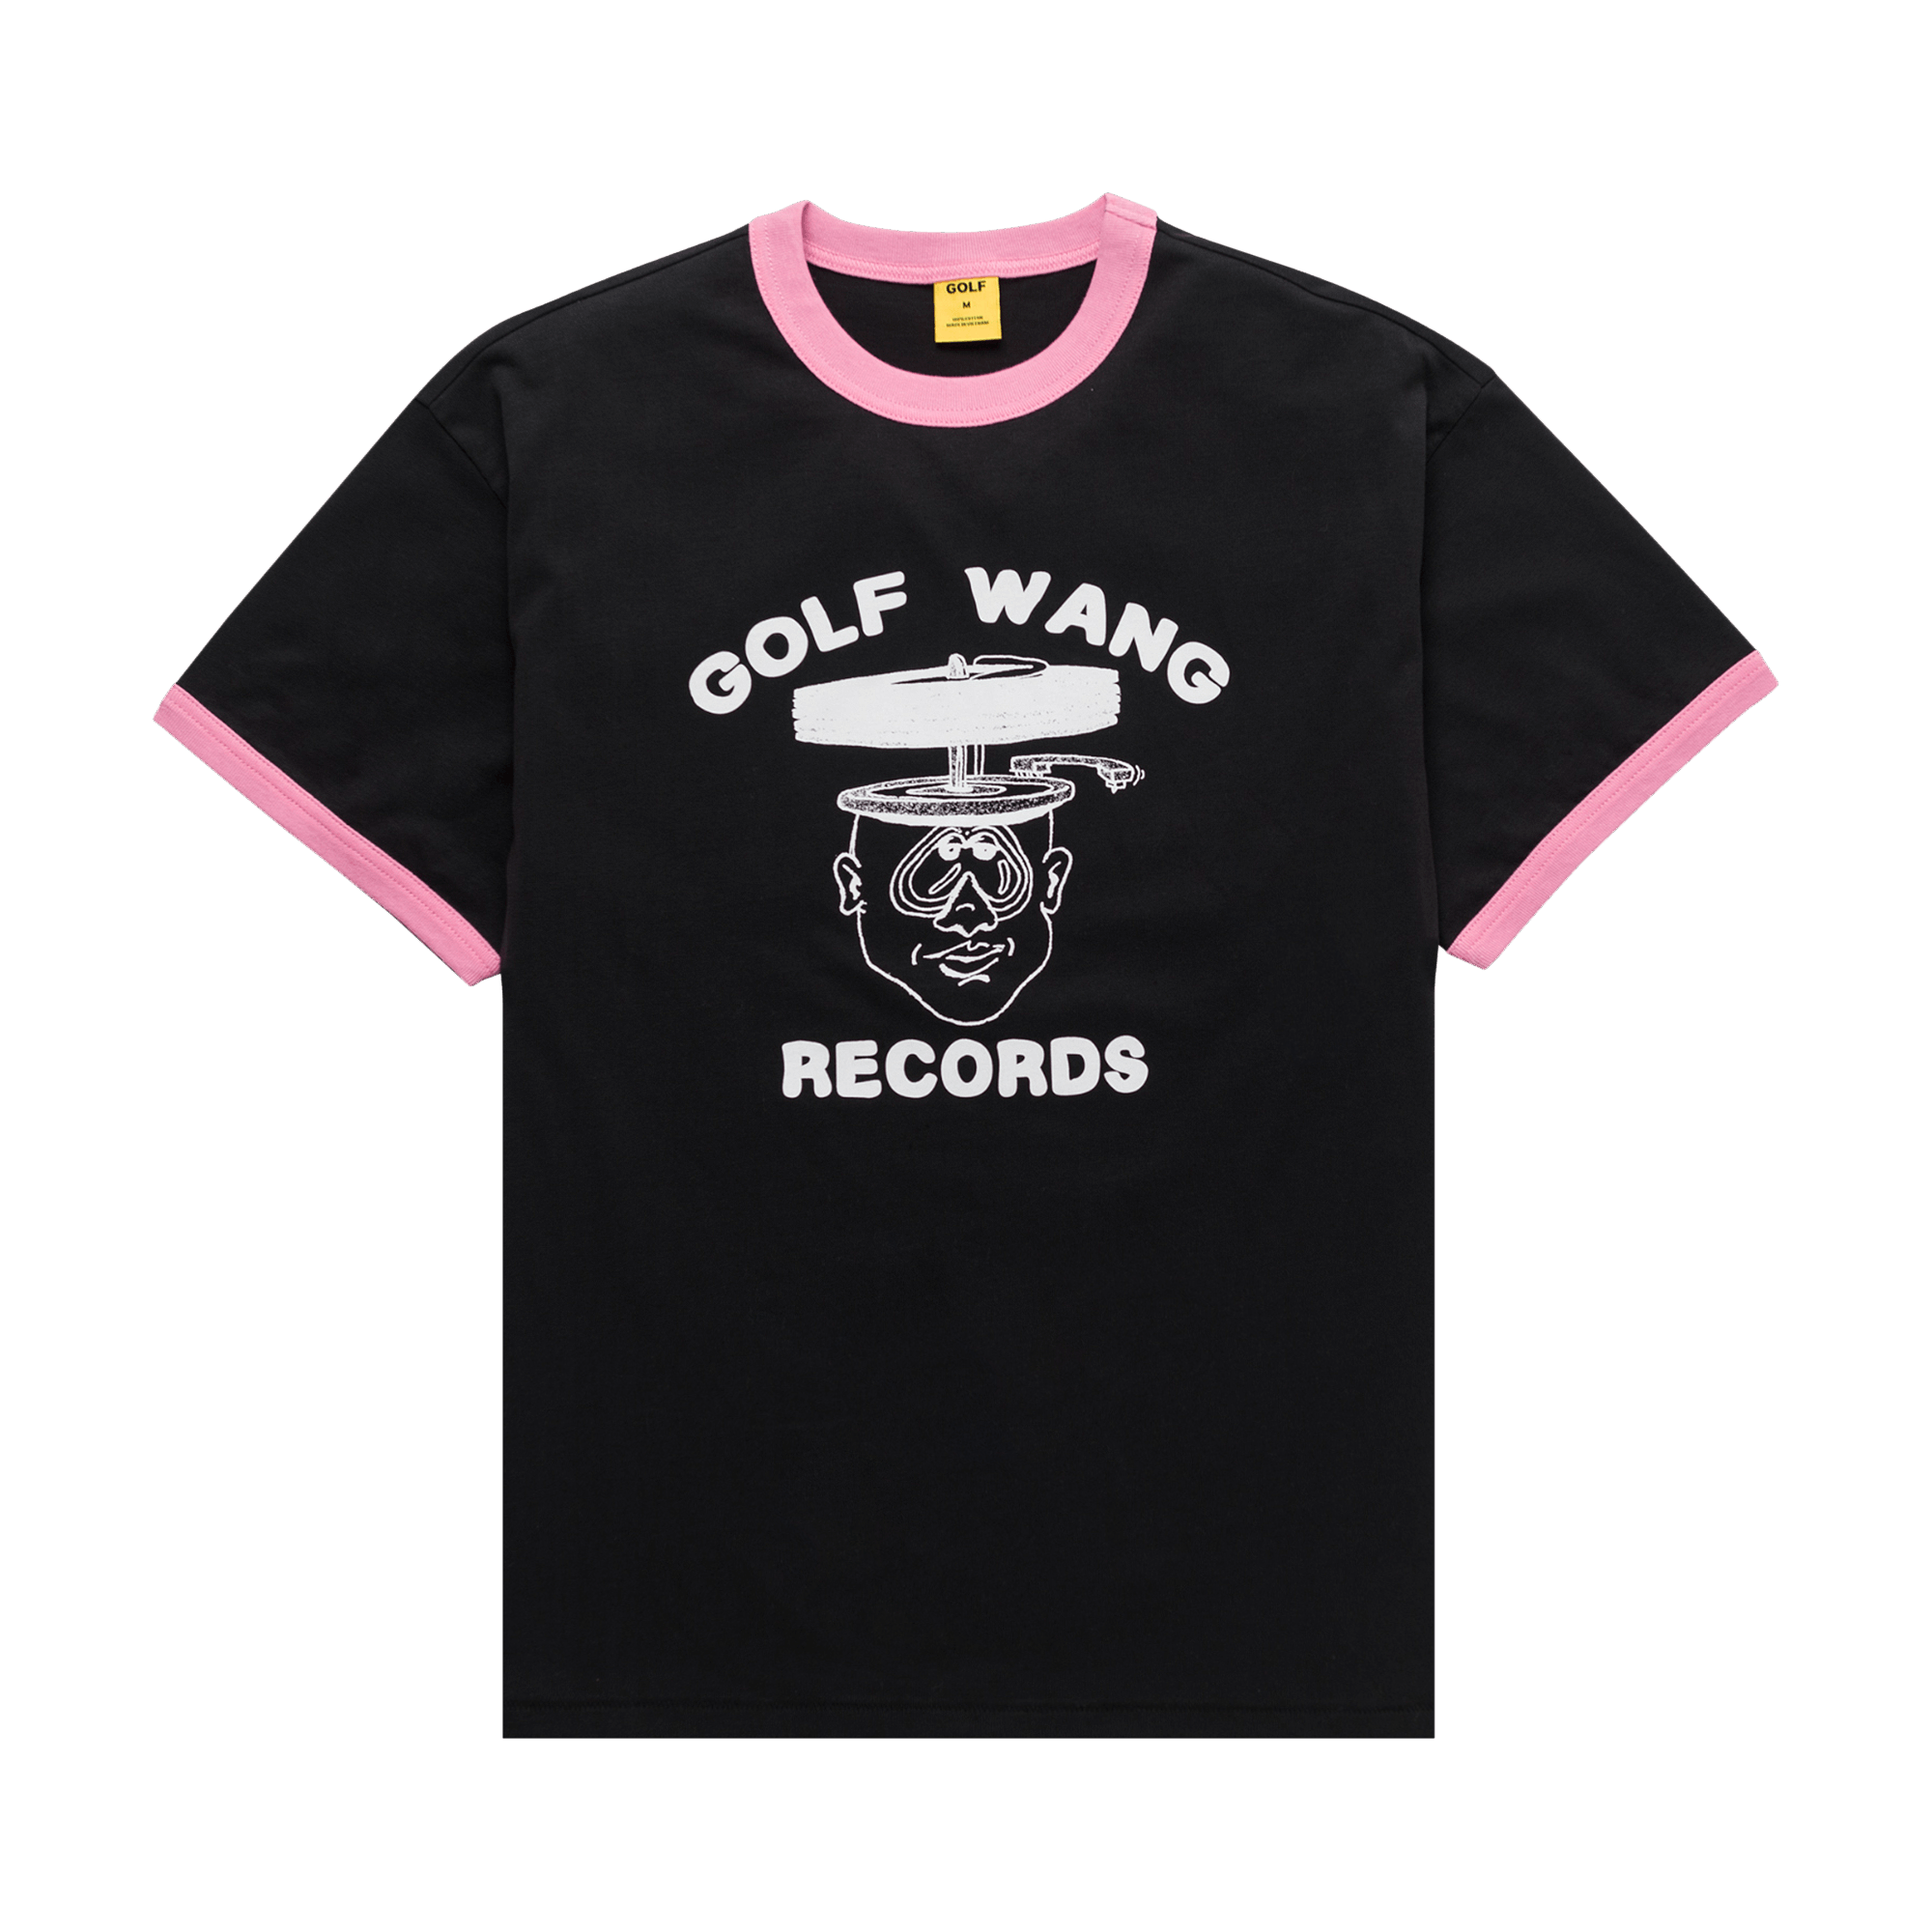 Pre-owned Golf Wang Records Ringer Tee 'black/pink'